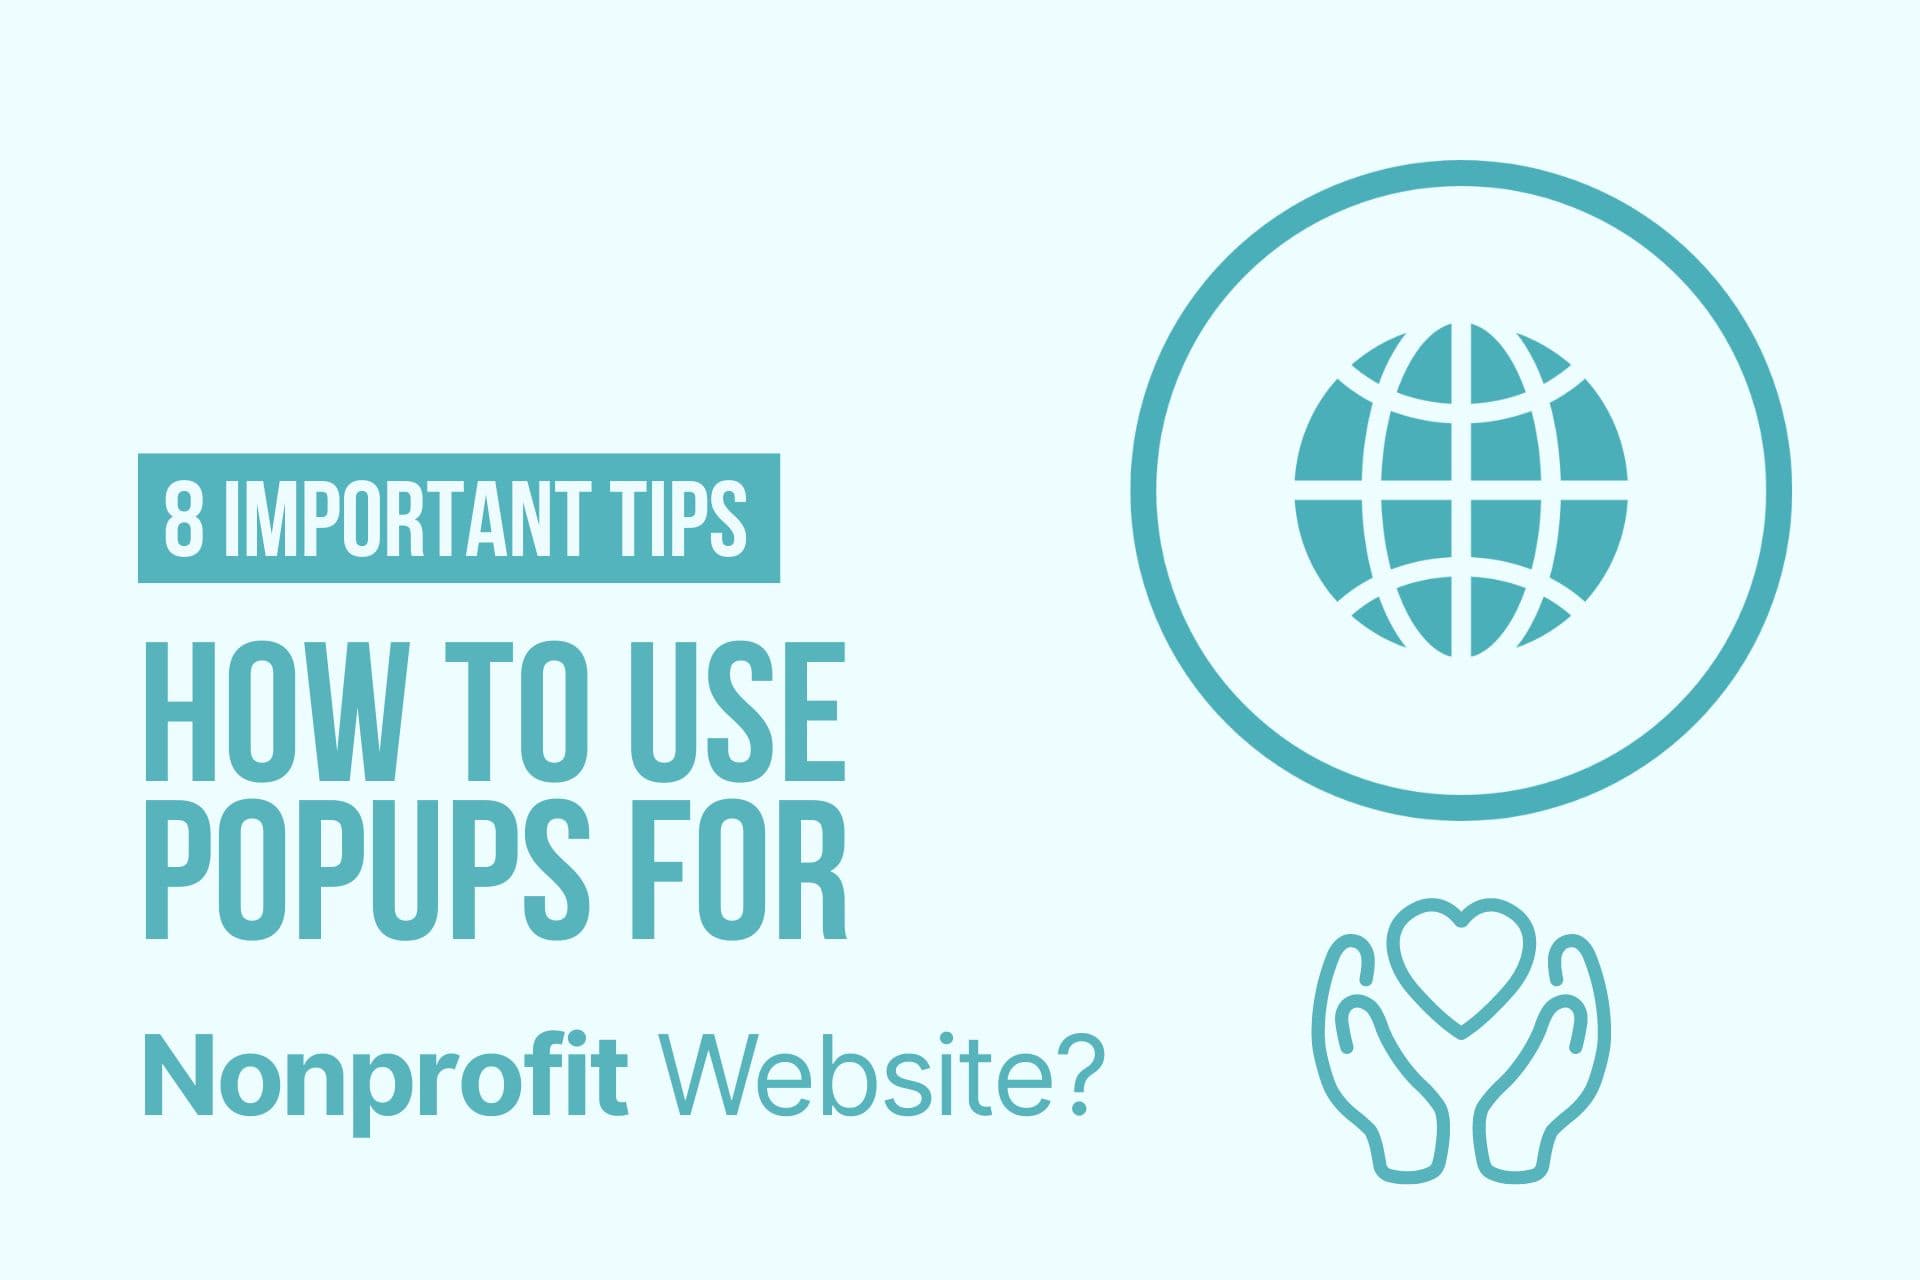 8 Important Tips on How to Use Popups for Nonprofit Websites